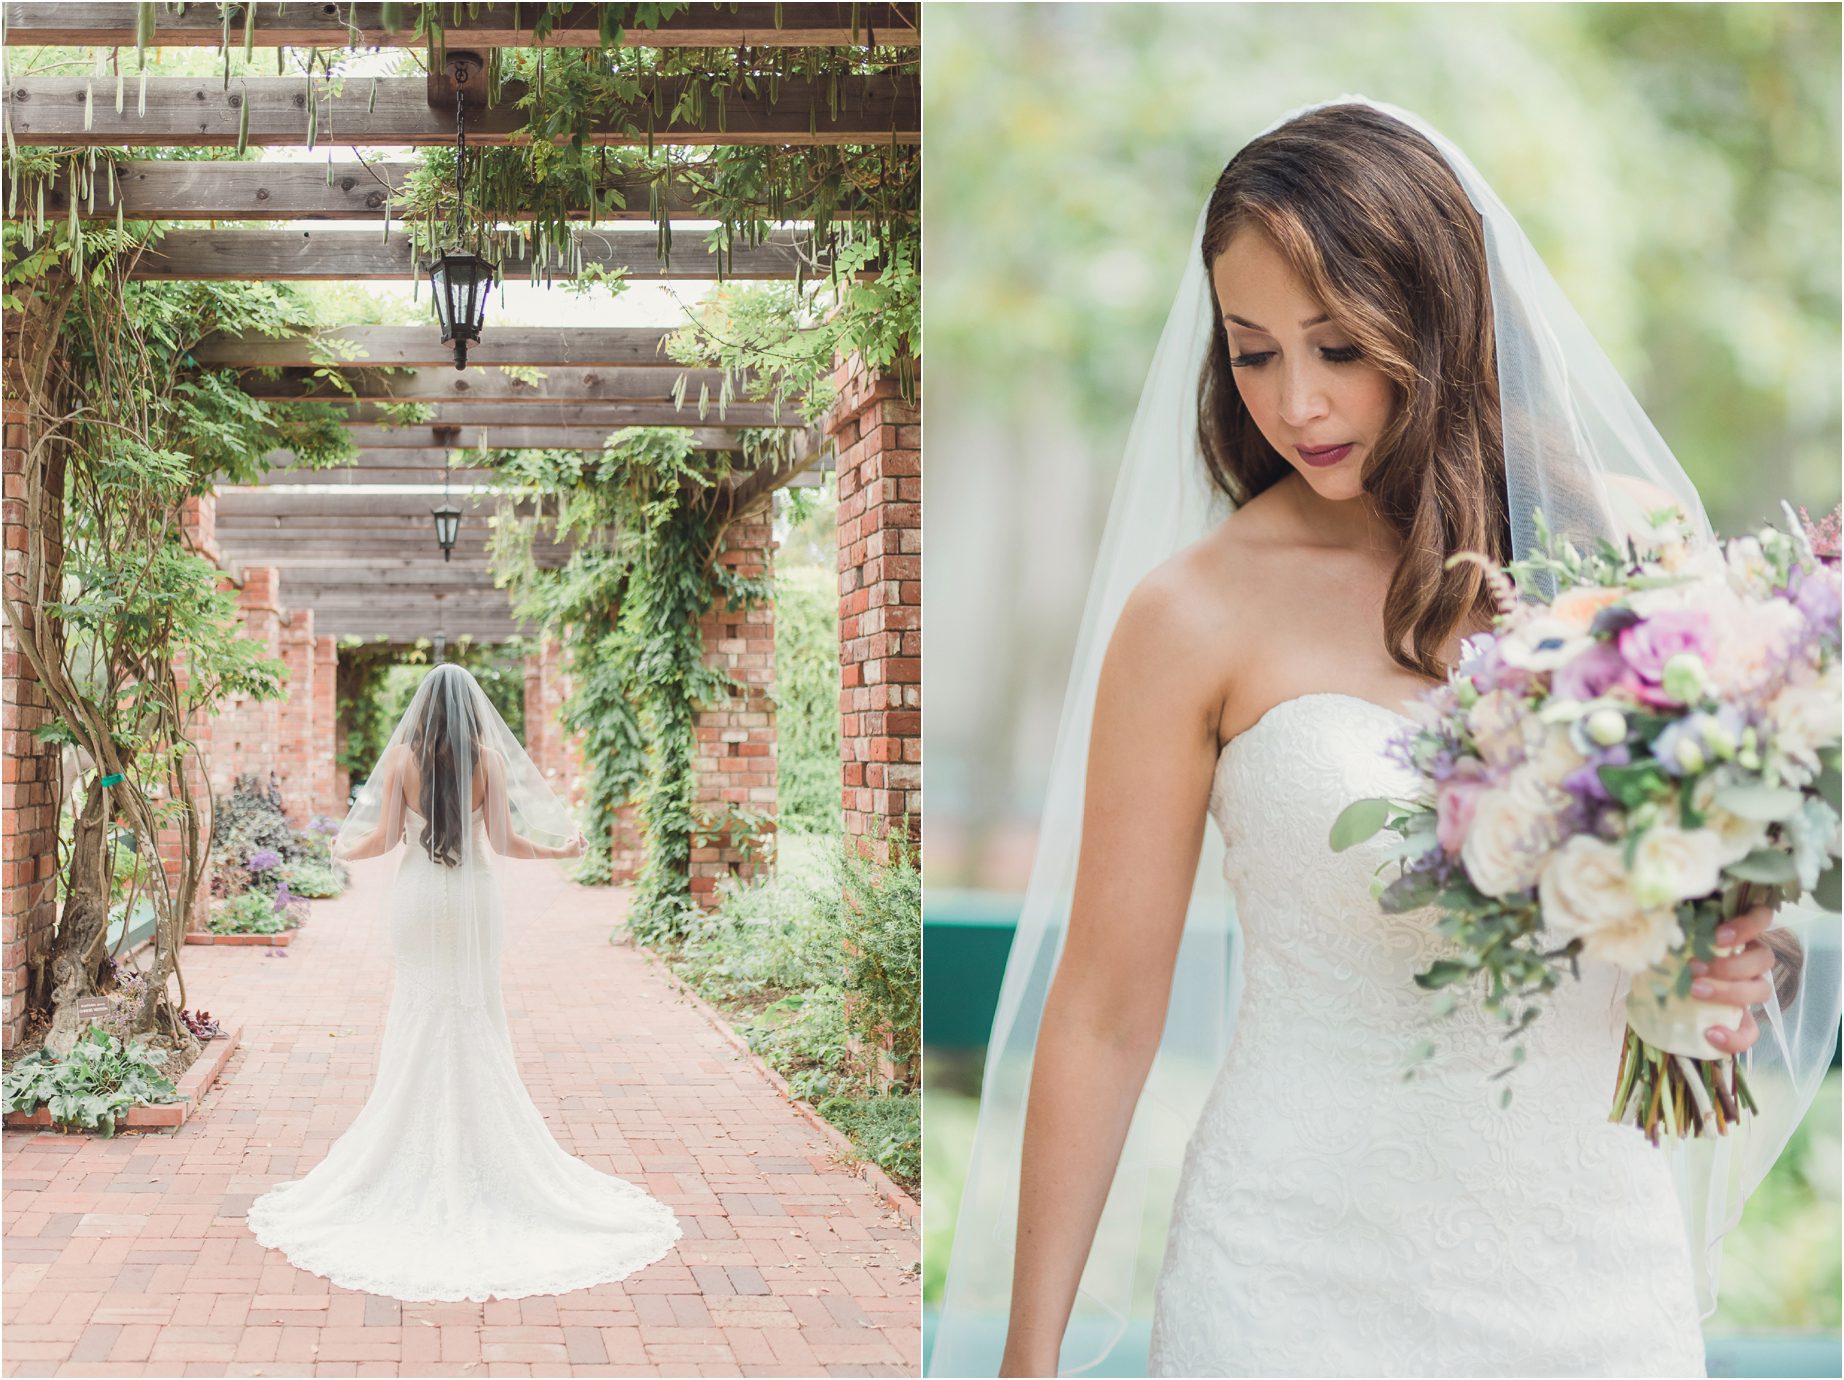 A bride stands under an overhang filled with greenery and climbing vines at the belmond el encanto